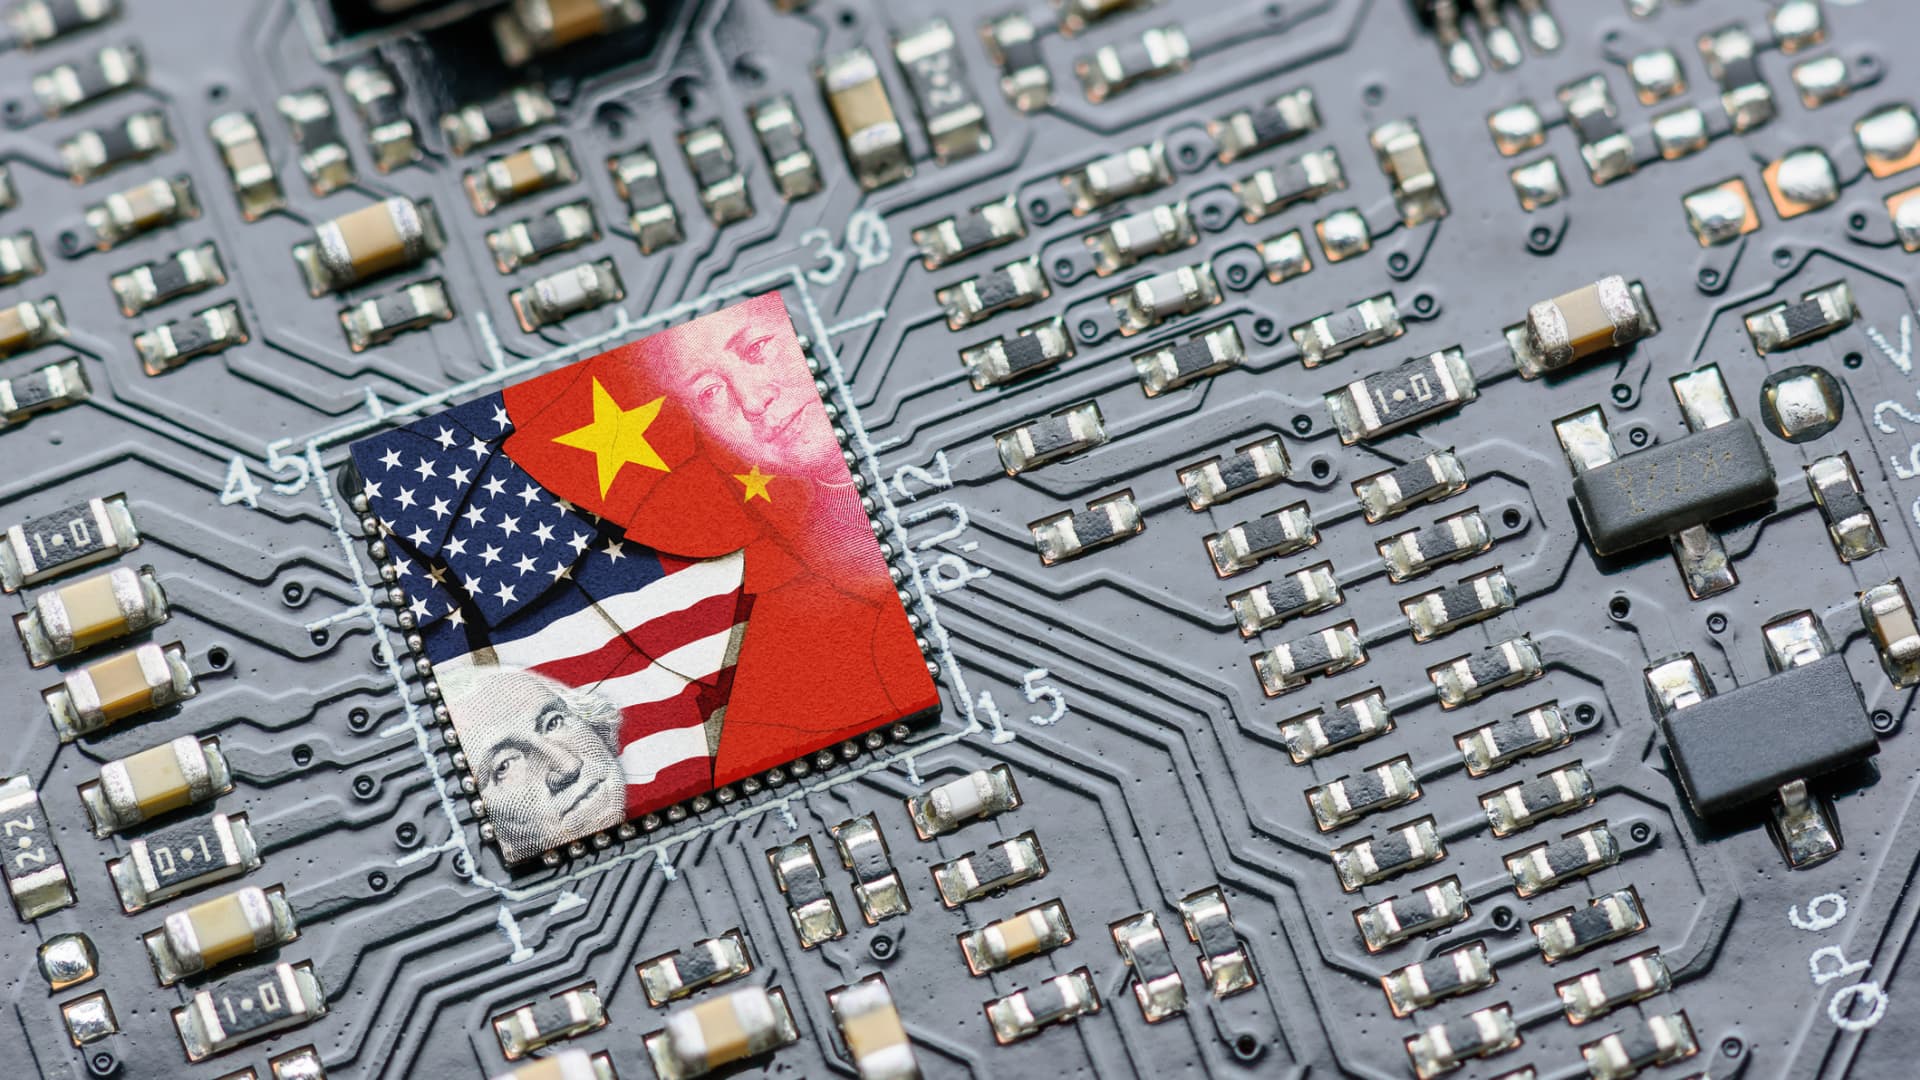 AMD, Intel dip on report China told telecoms to remove foreign chips